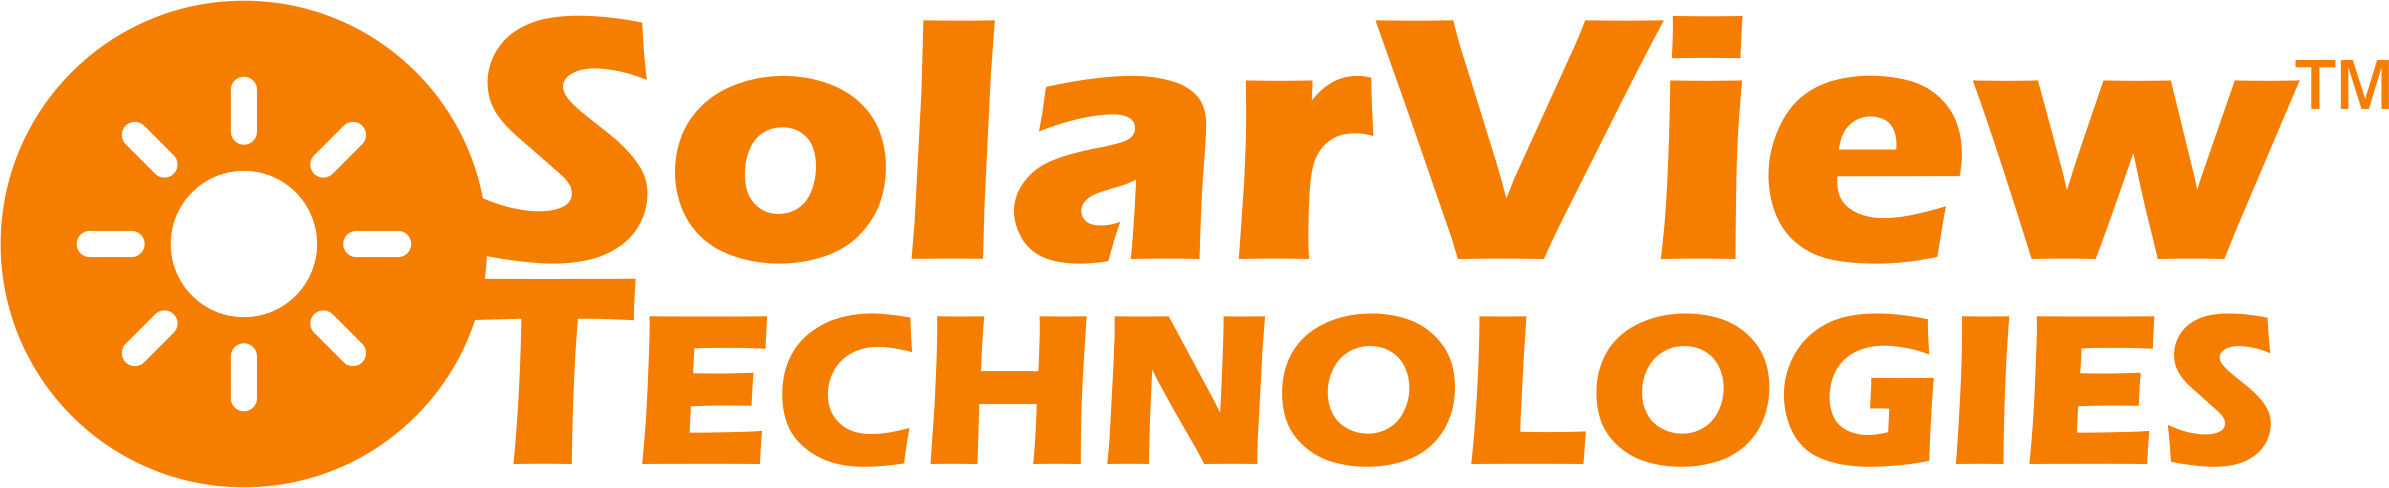 SolarView Technologies